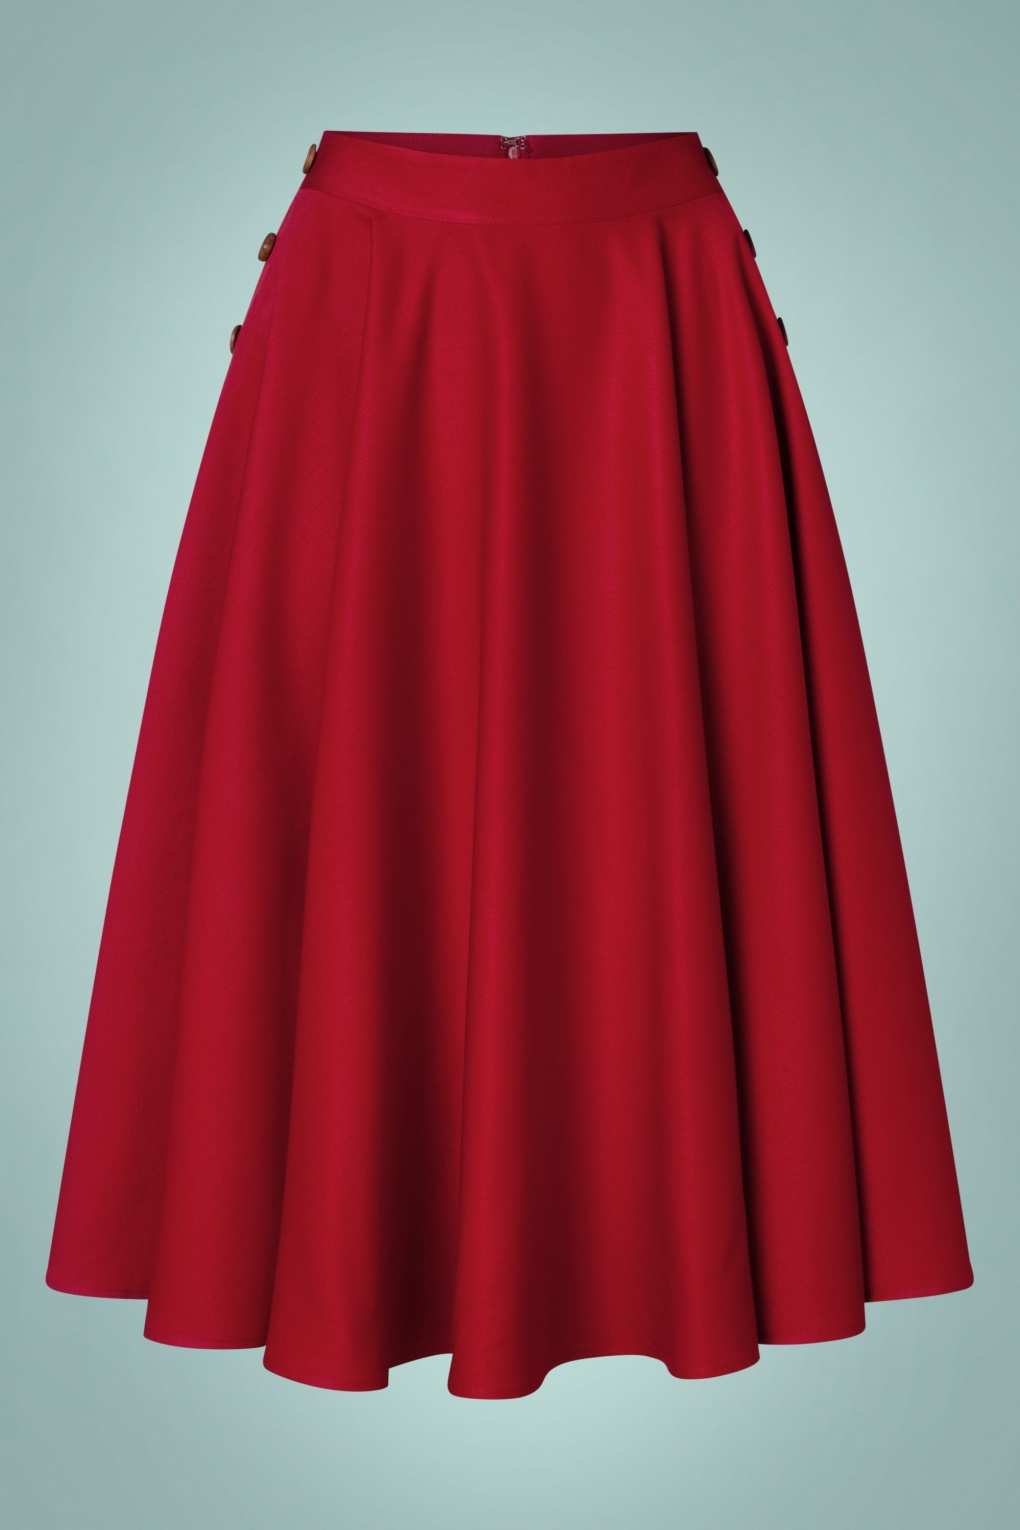 Polly May Swing Skirt in Red